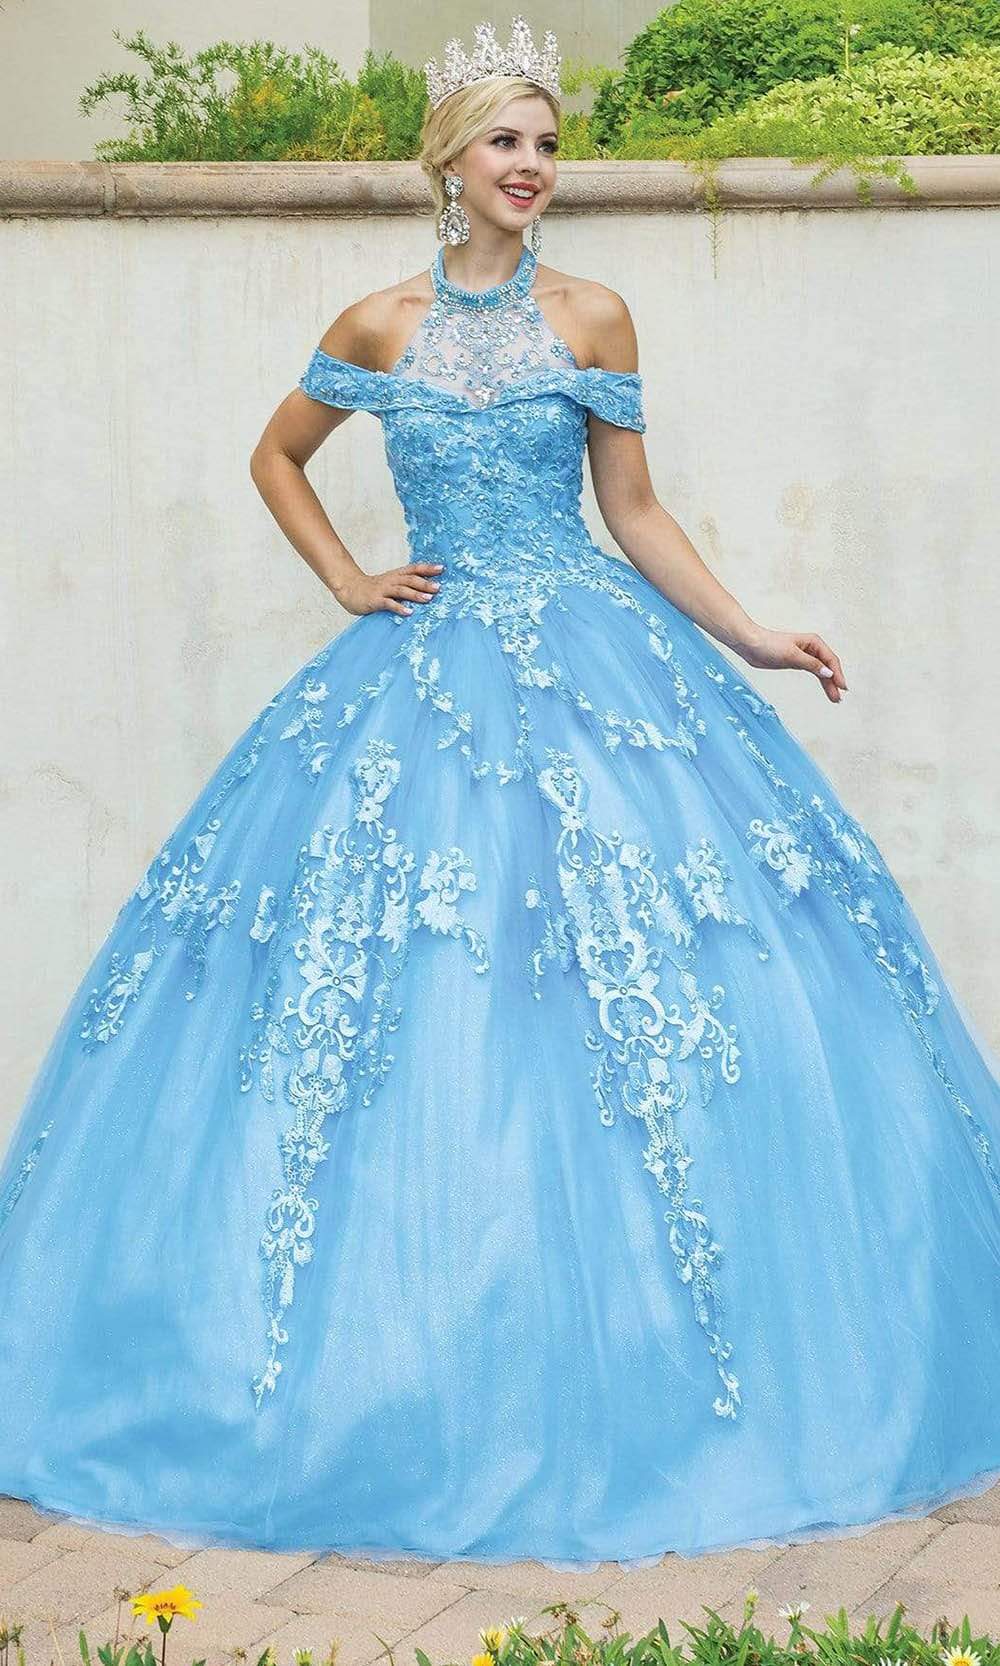 Image of Dancing Queen - 1577 Halter Embroidered Ballgown